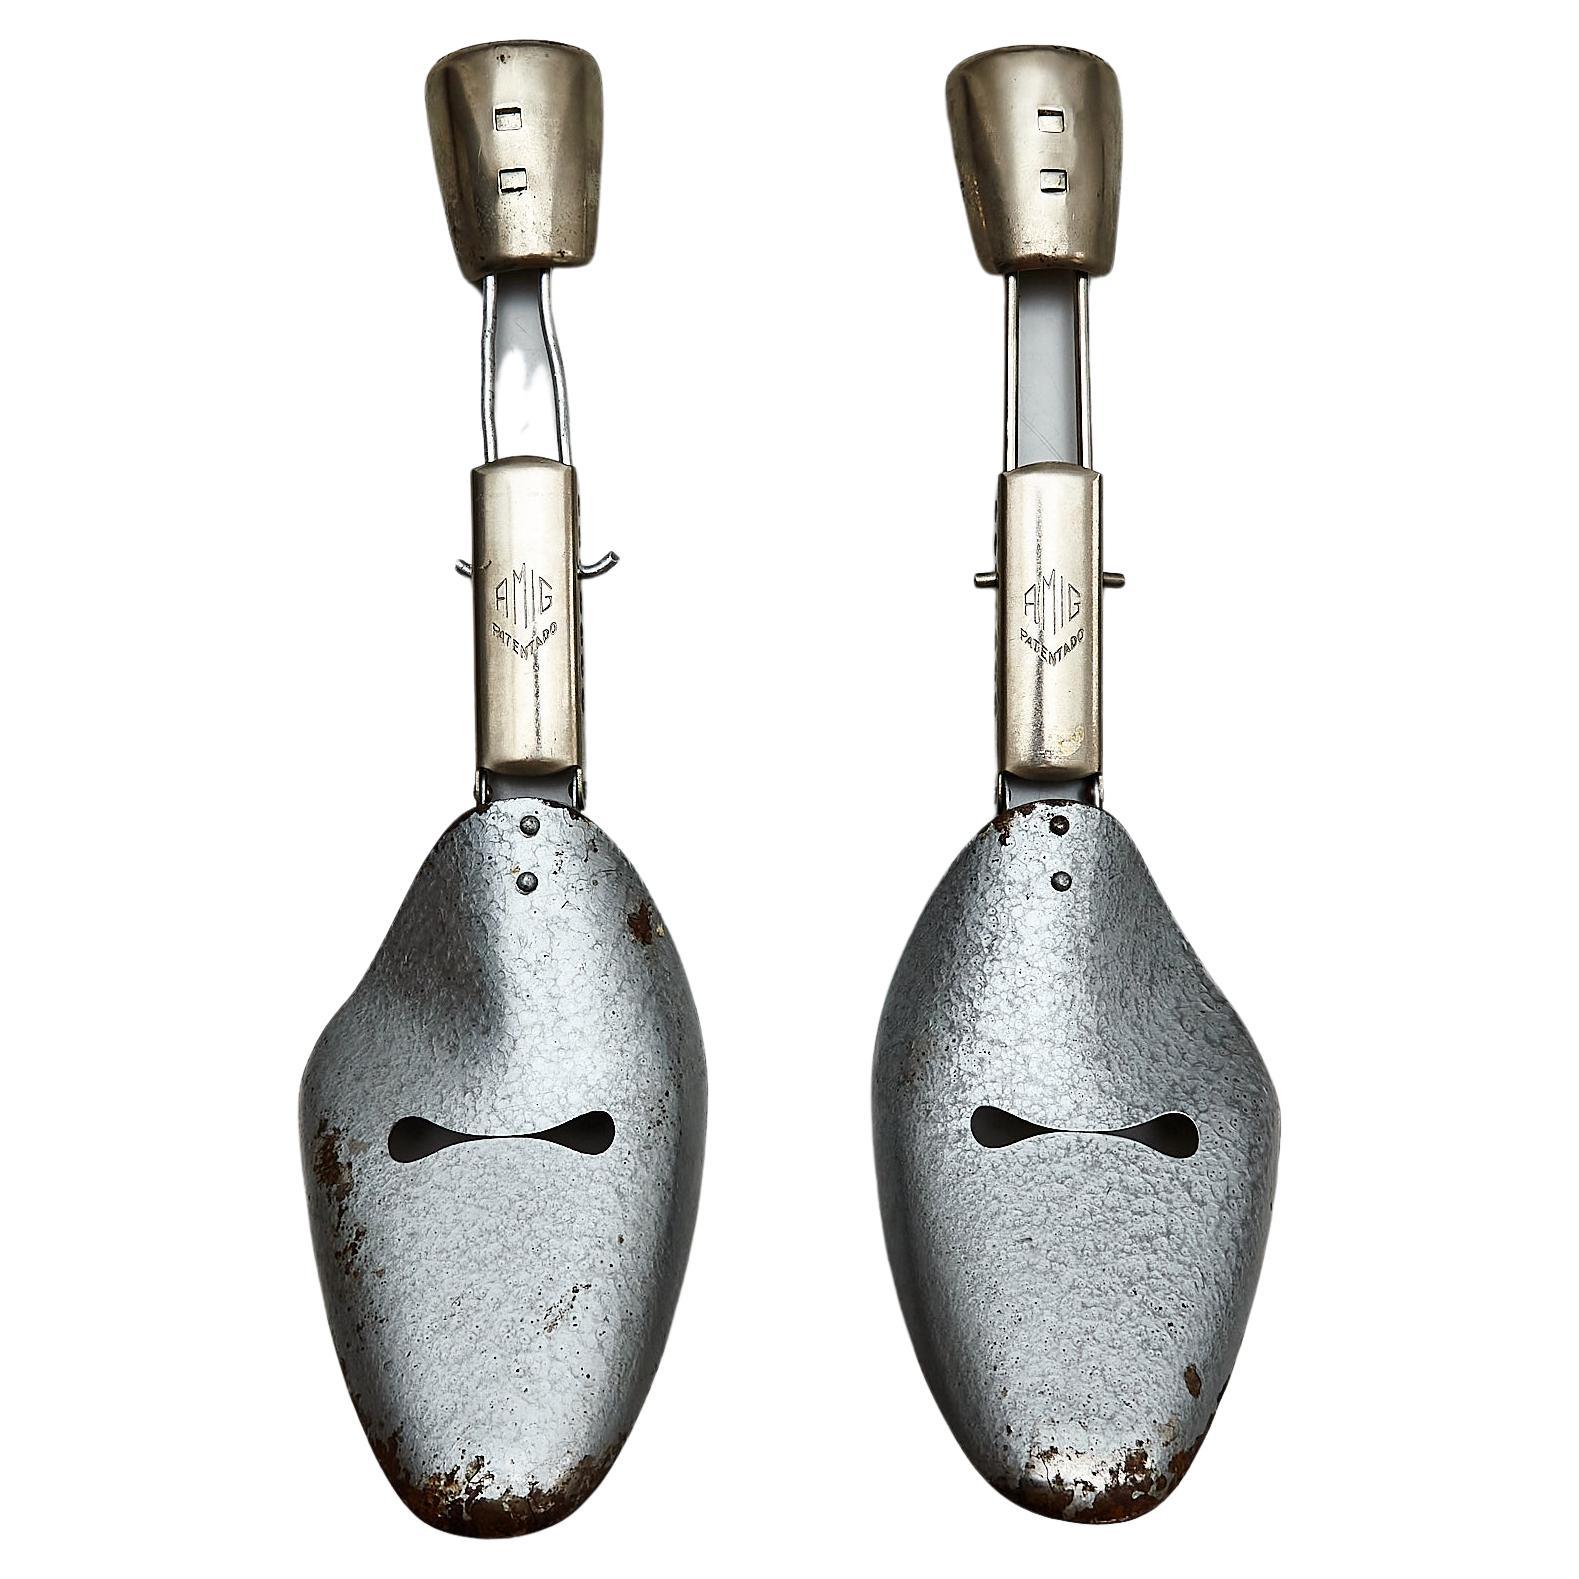 Vintage Spanish Metal Shoe Trees - Circa 1960 - AMD Patented For Sale